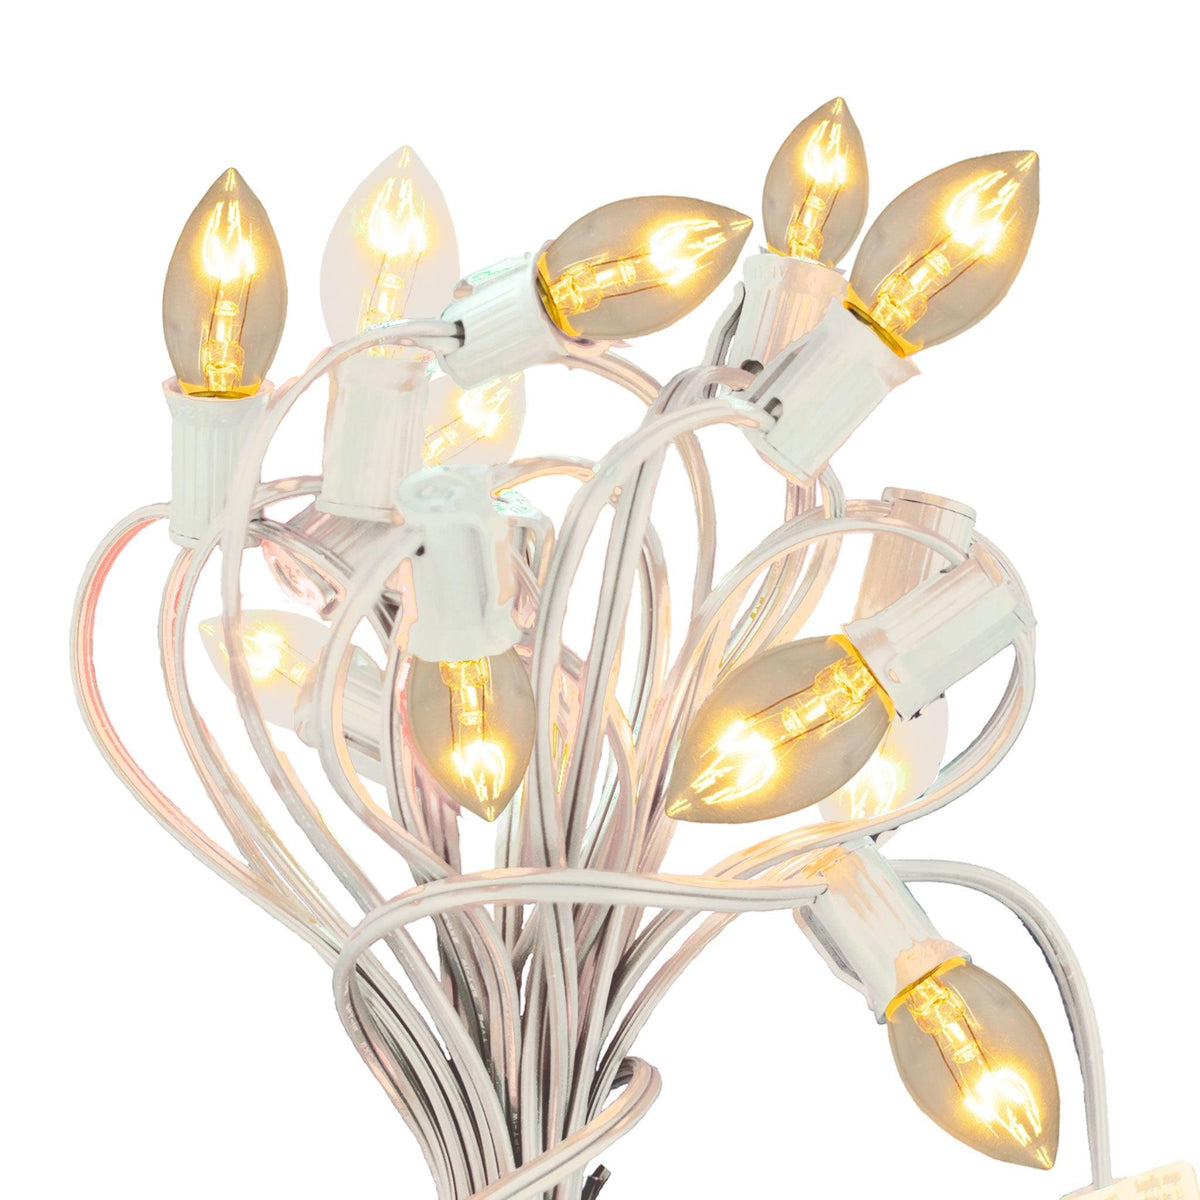 C-7 & C-9 Clear Christmas Light Bulbs.  Replace your old bulbs with a set of brand new Candelabra Lights.  On sale at leedisplay.com